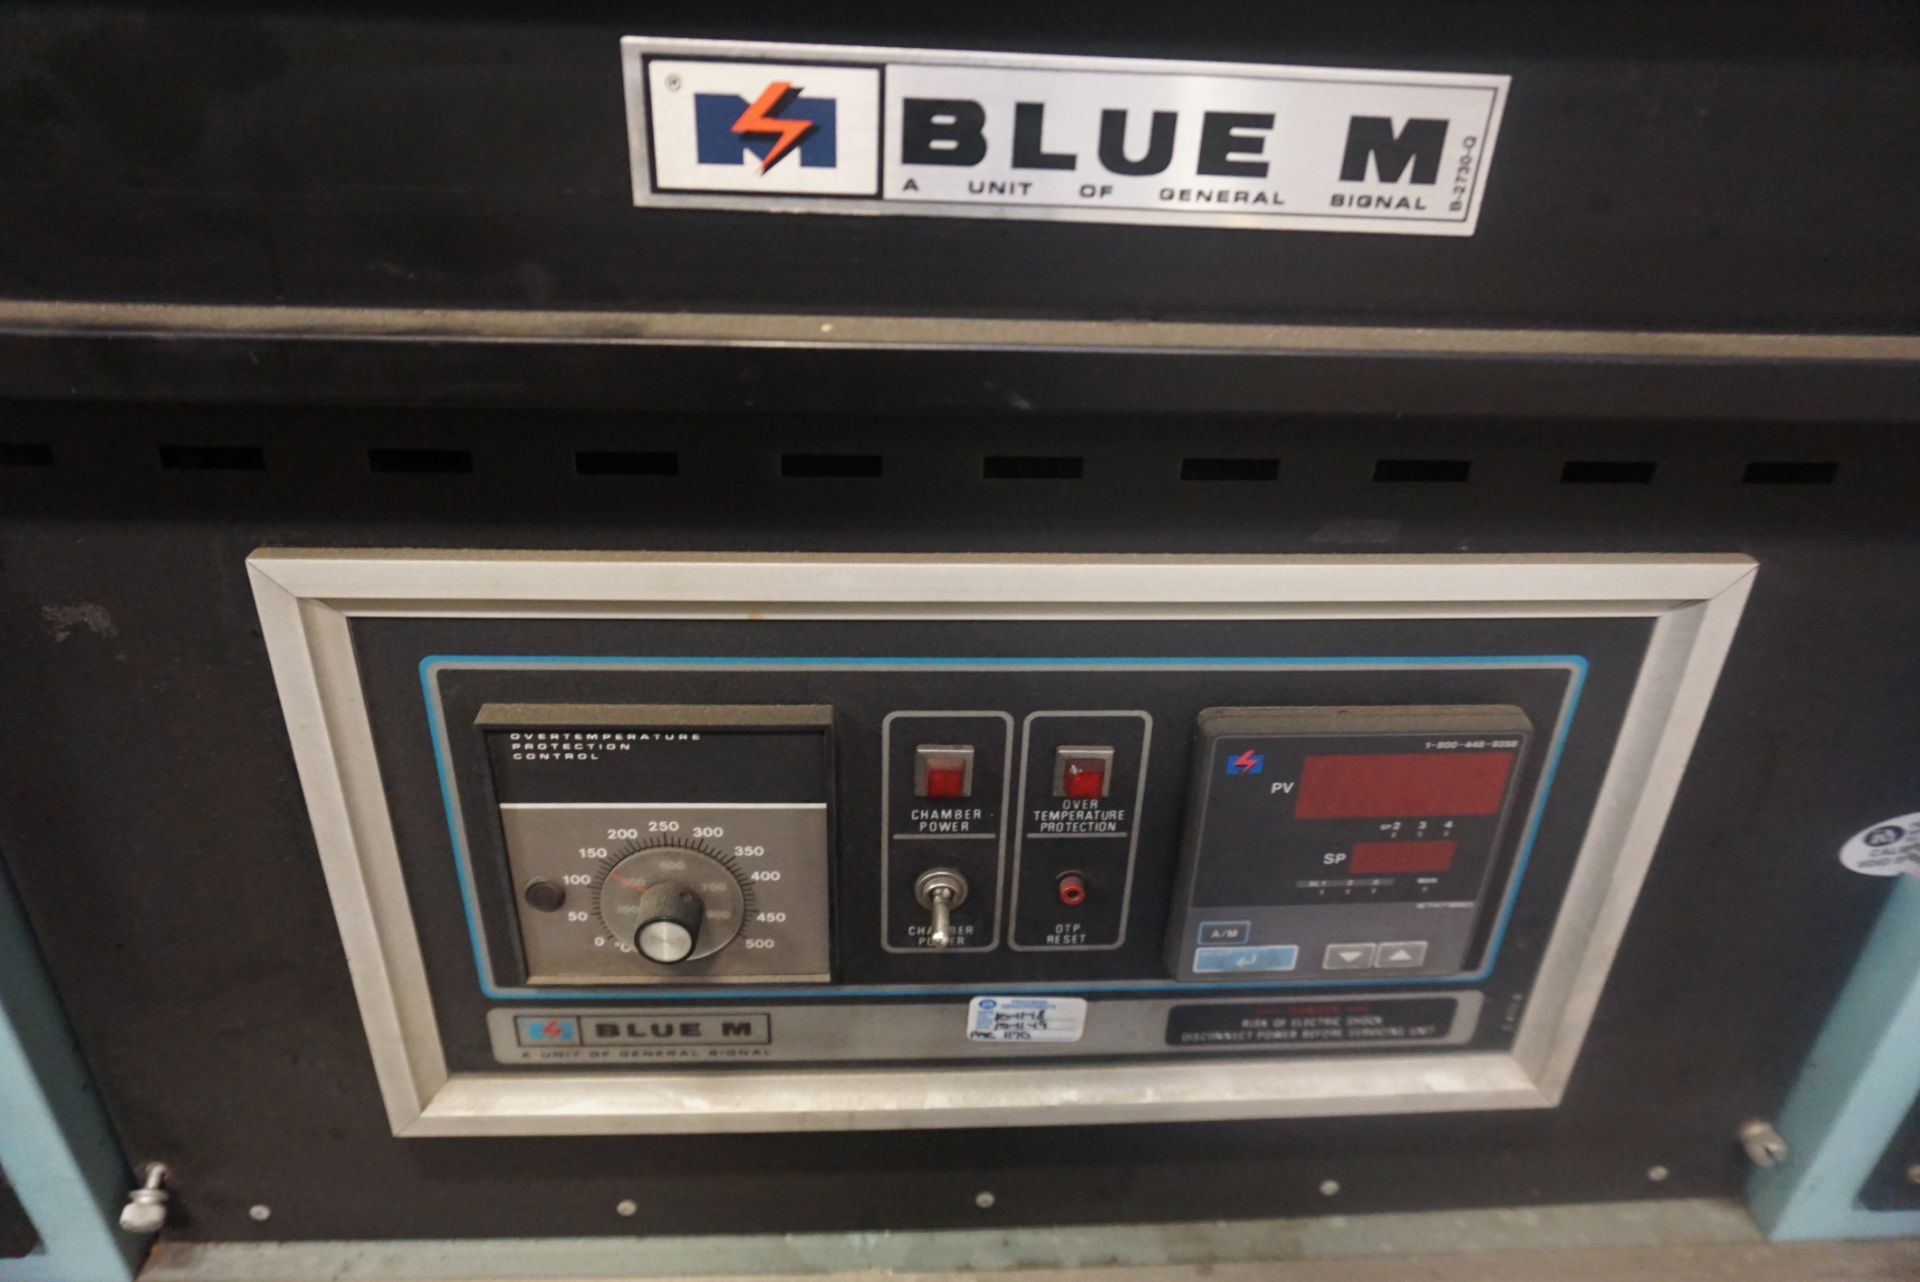 Blue M DC256C 650 Degree Max. Temp. Convection Oven, s/n DC3476 - Image 5 of 5